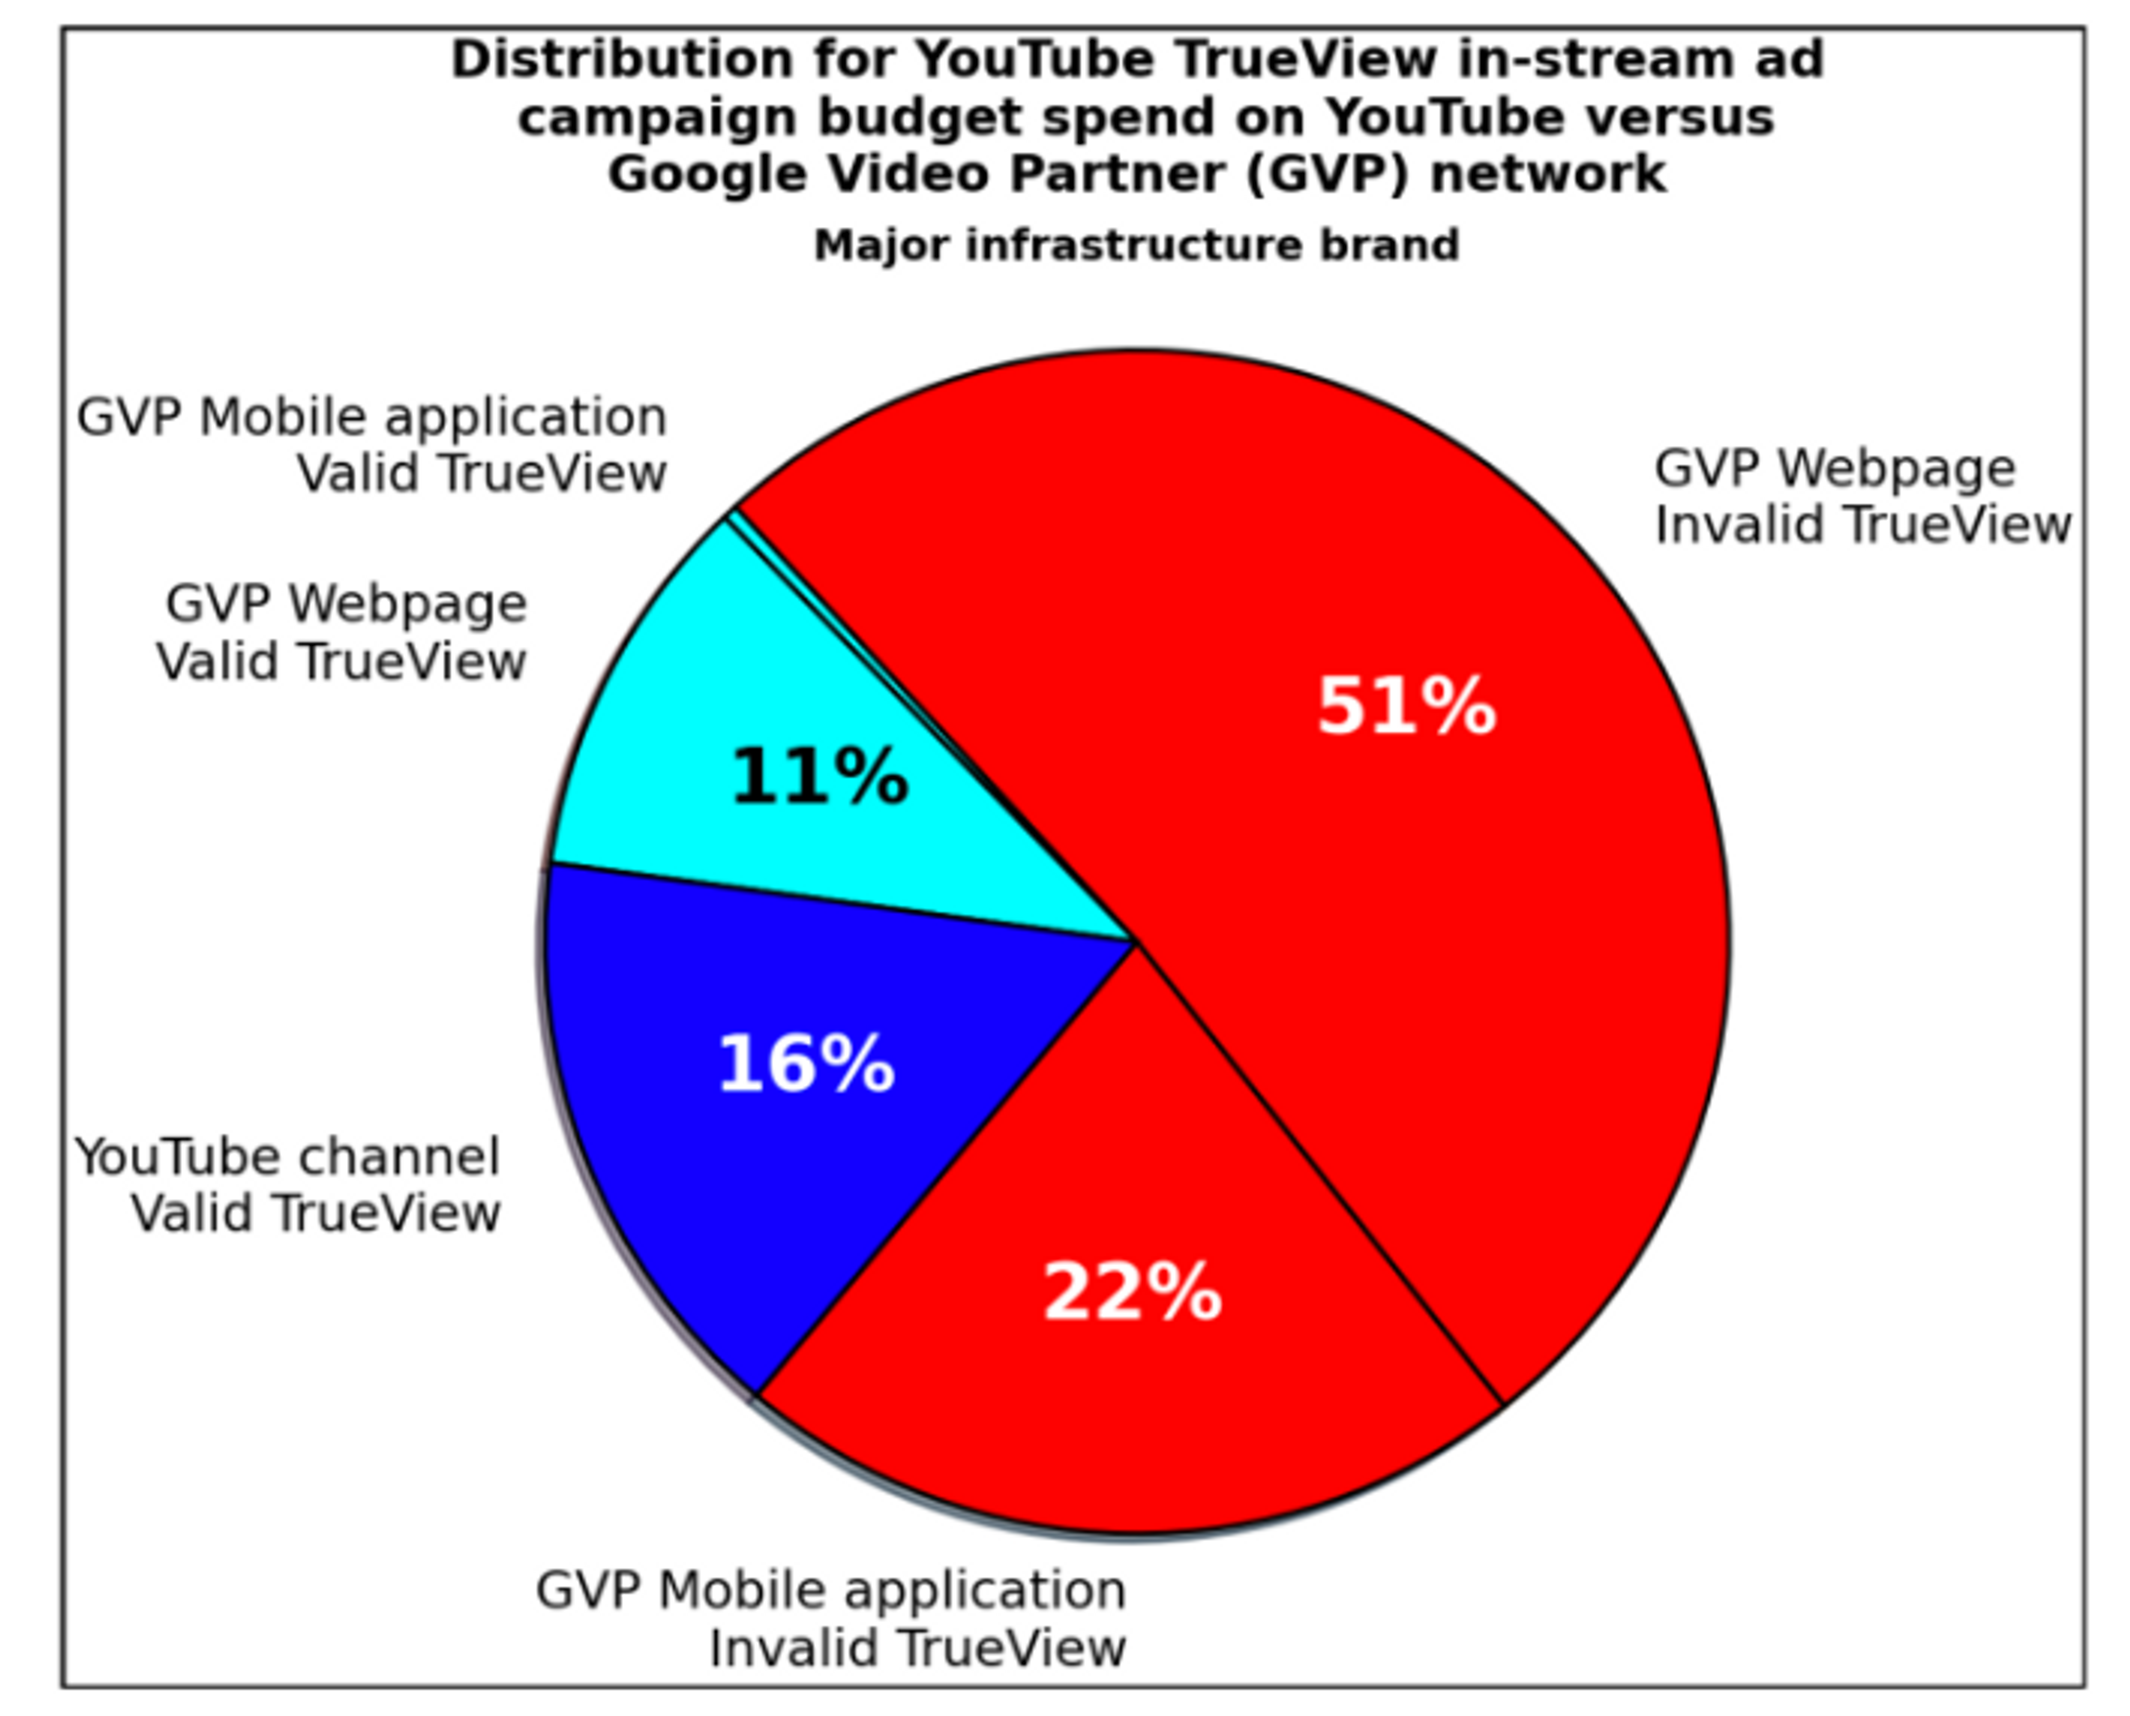 Pie chart of distribution for youtube trueview in-stream ad campaign budget versus GVP network